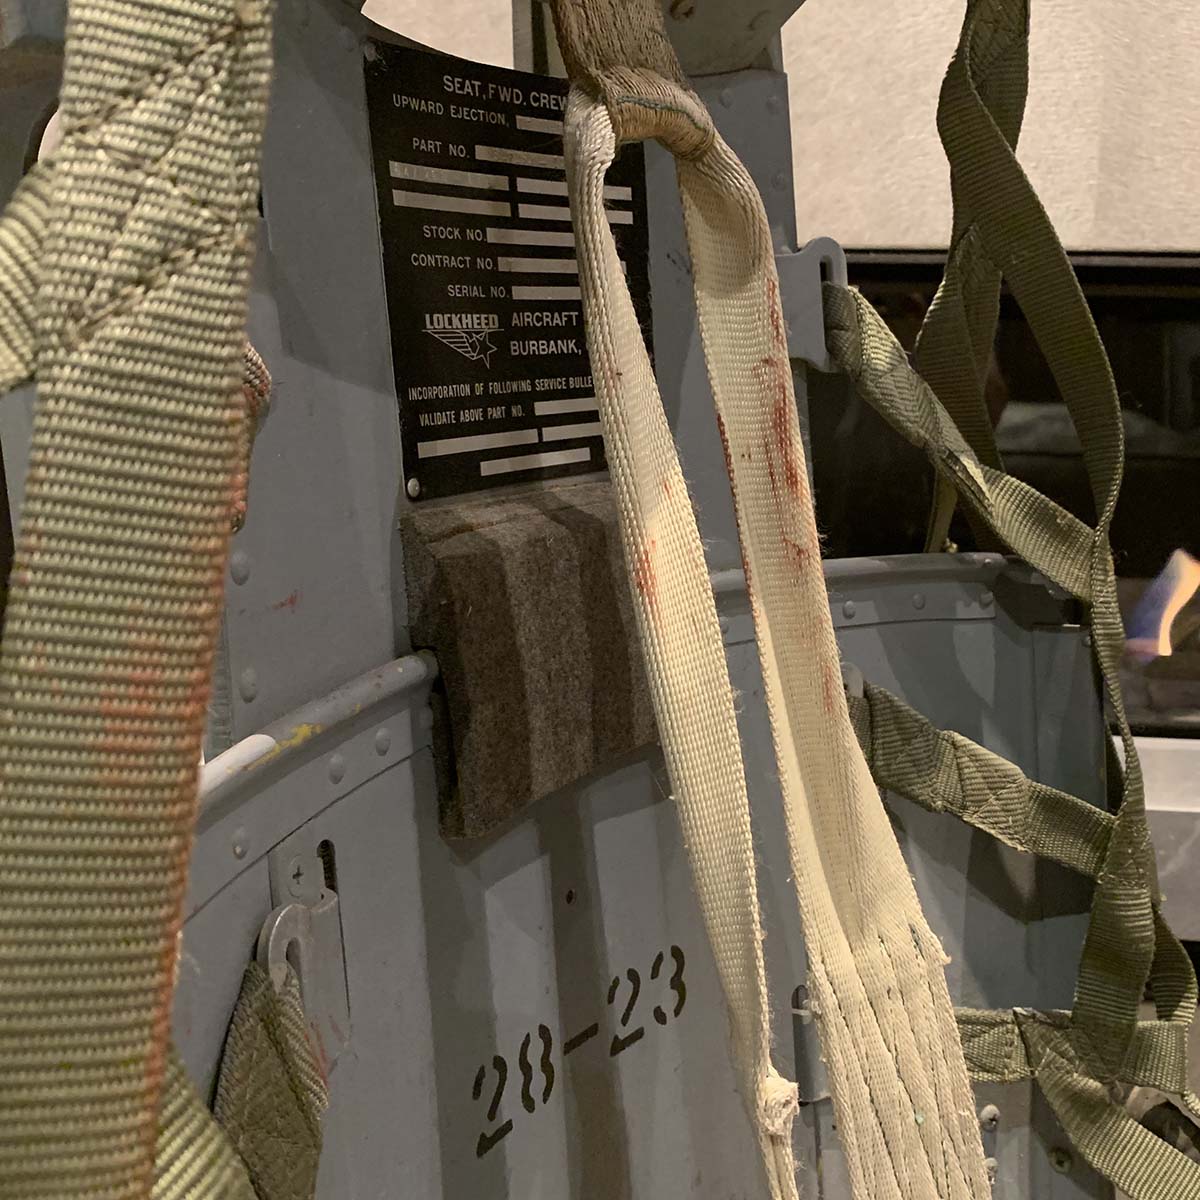 Detail of Lockheed ejection seat.